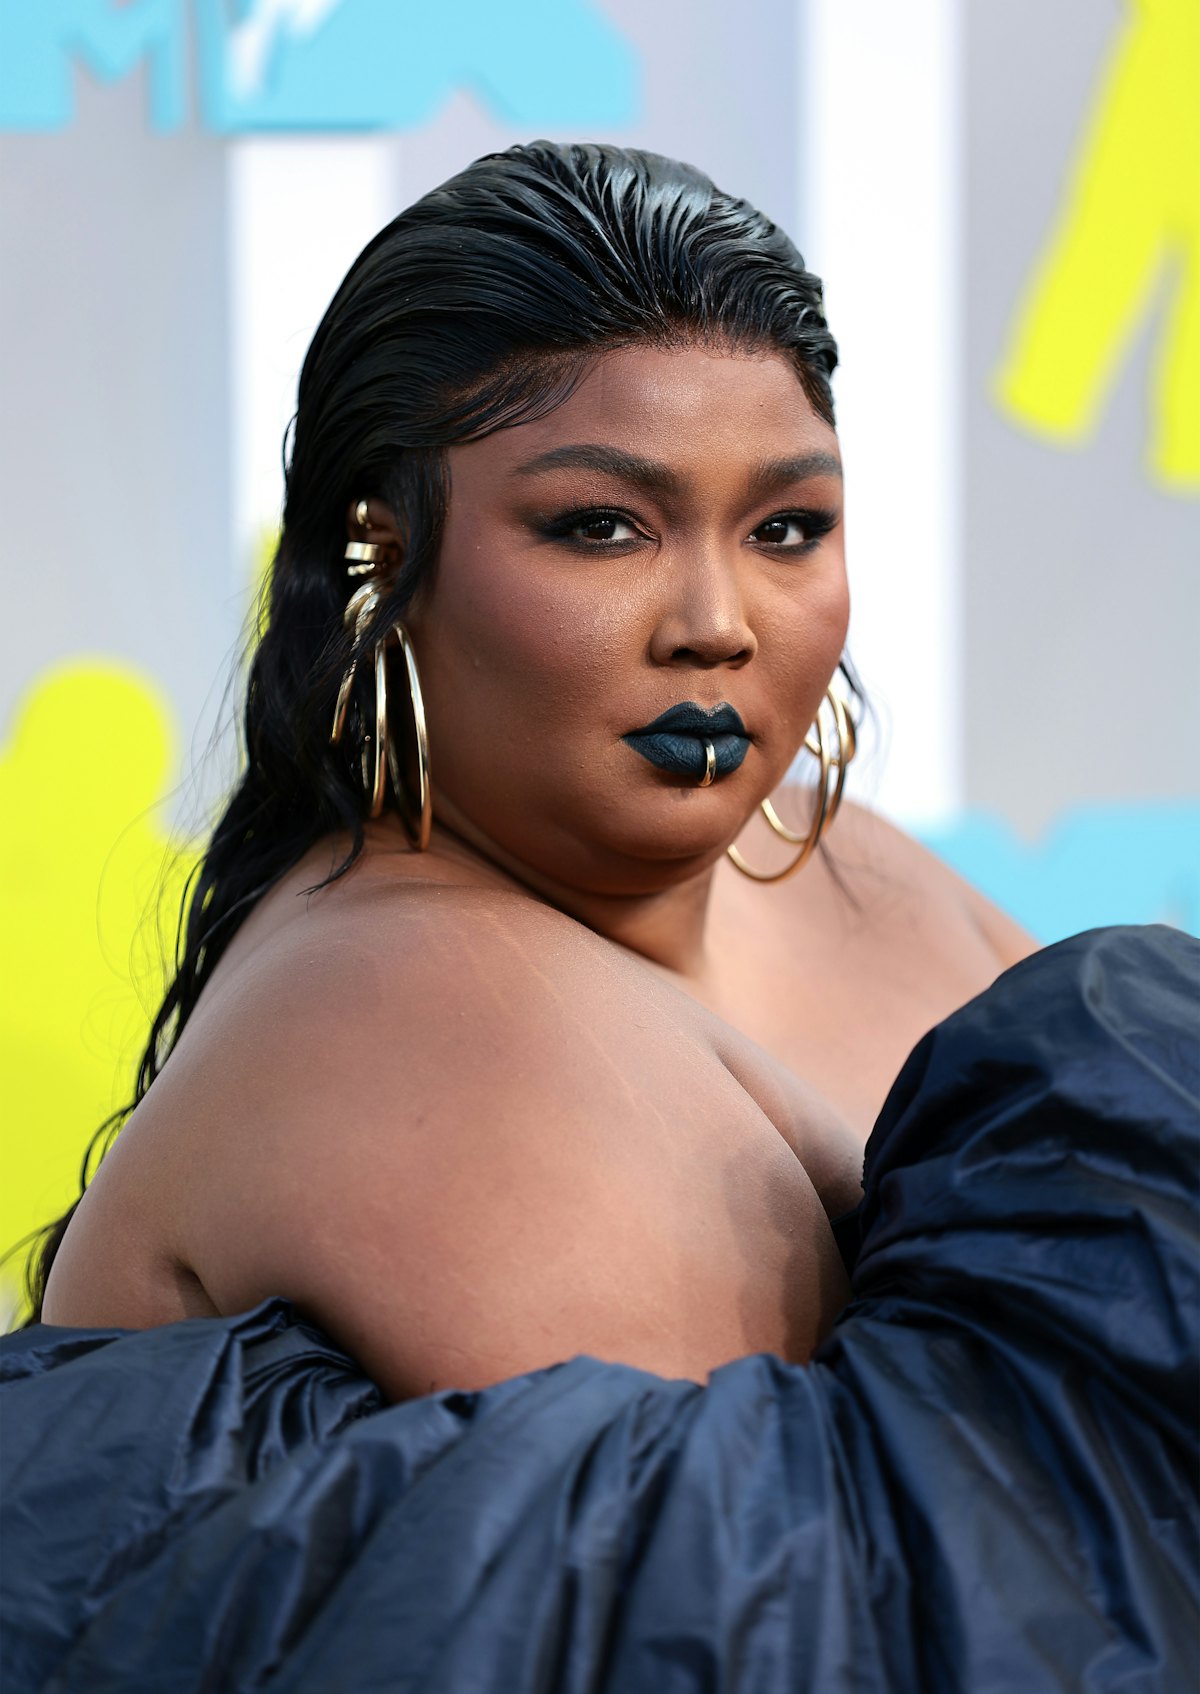 Lizzo's slicked back wet look hair one of the best hairstyles on the MTV VMAs 2022 red carpet.